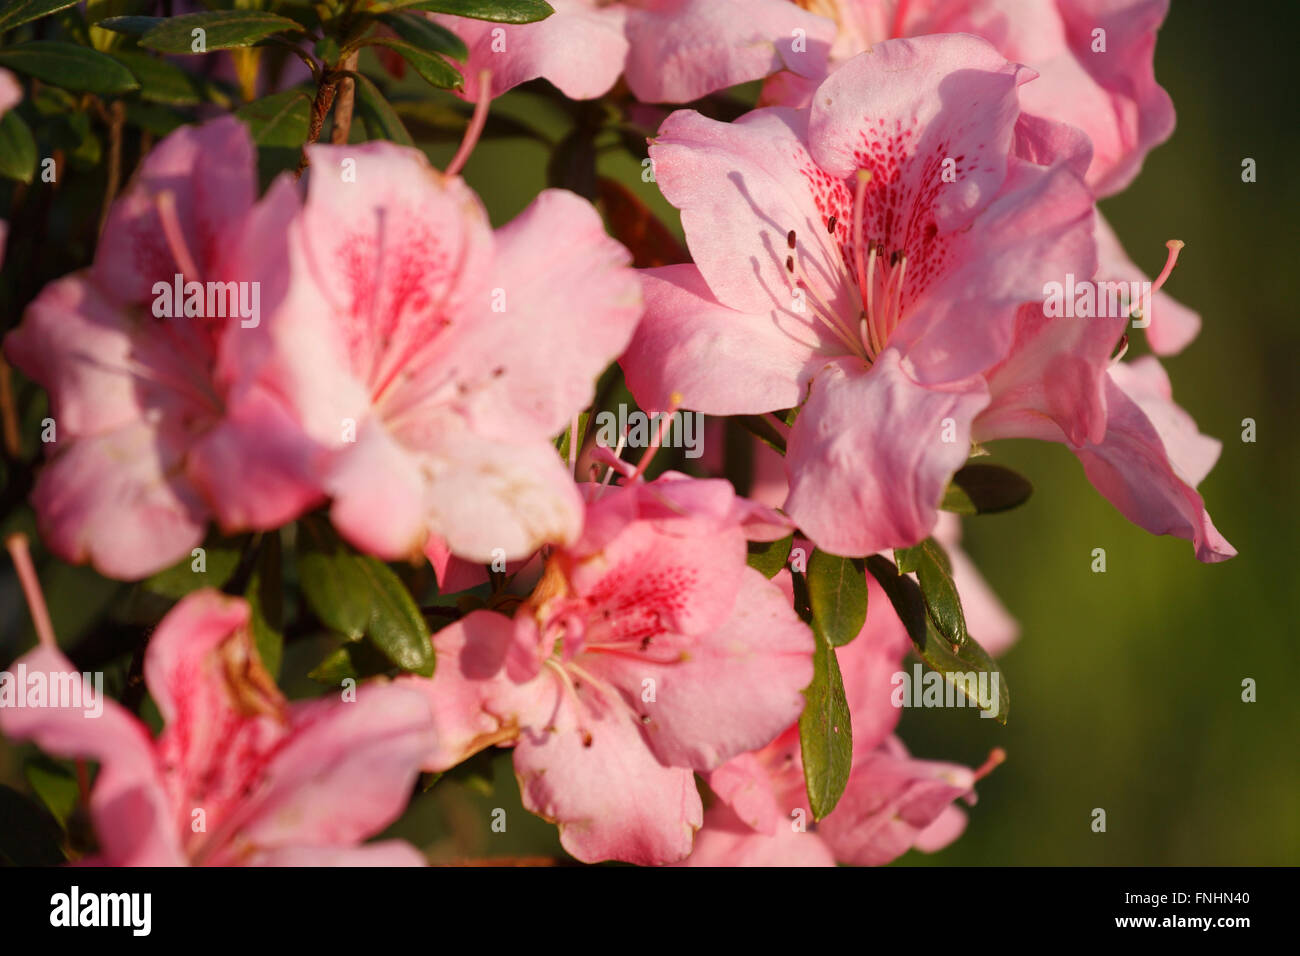 Pink lilies. Stock Photo